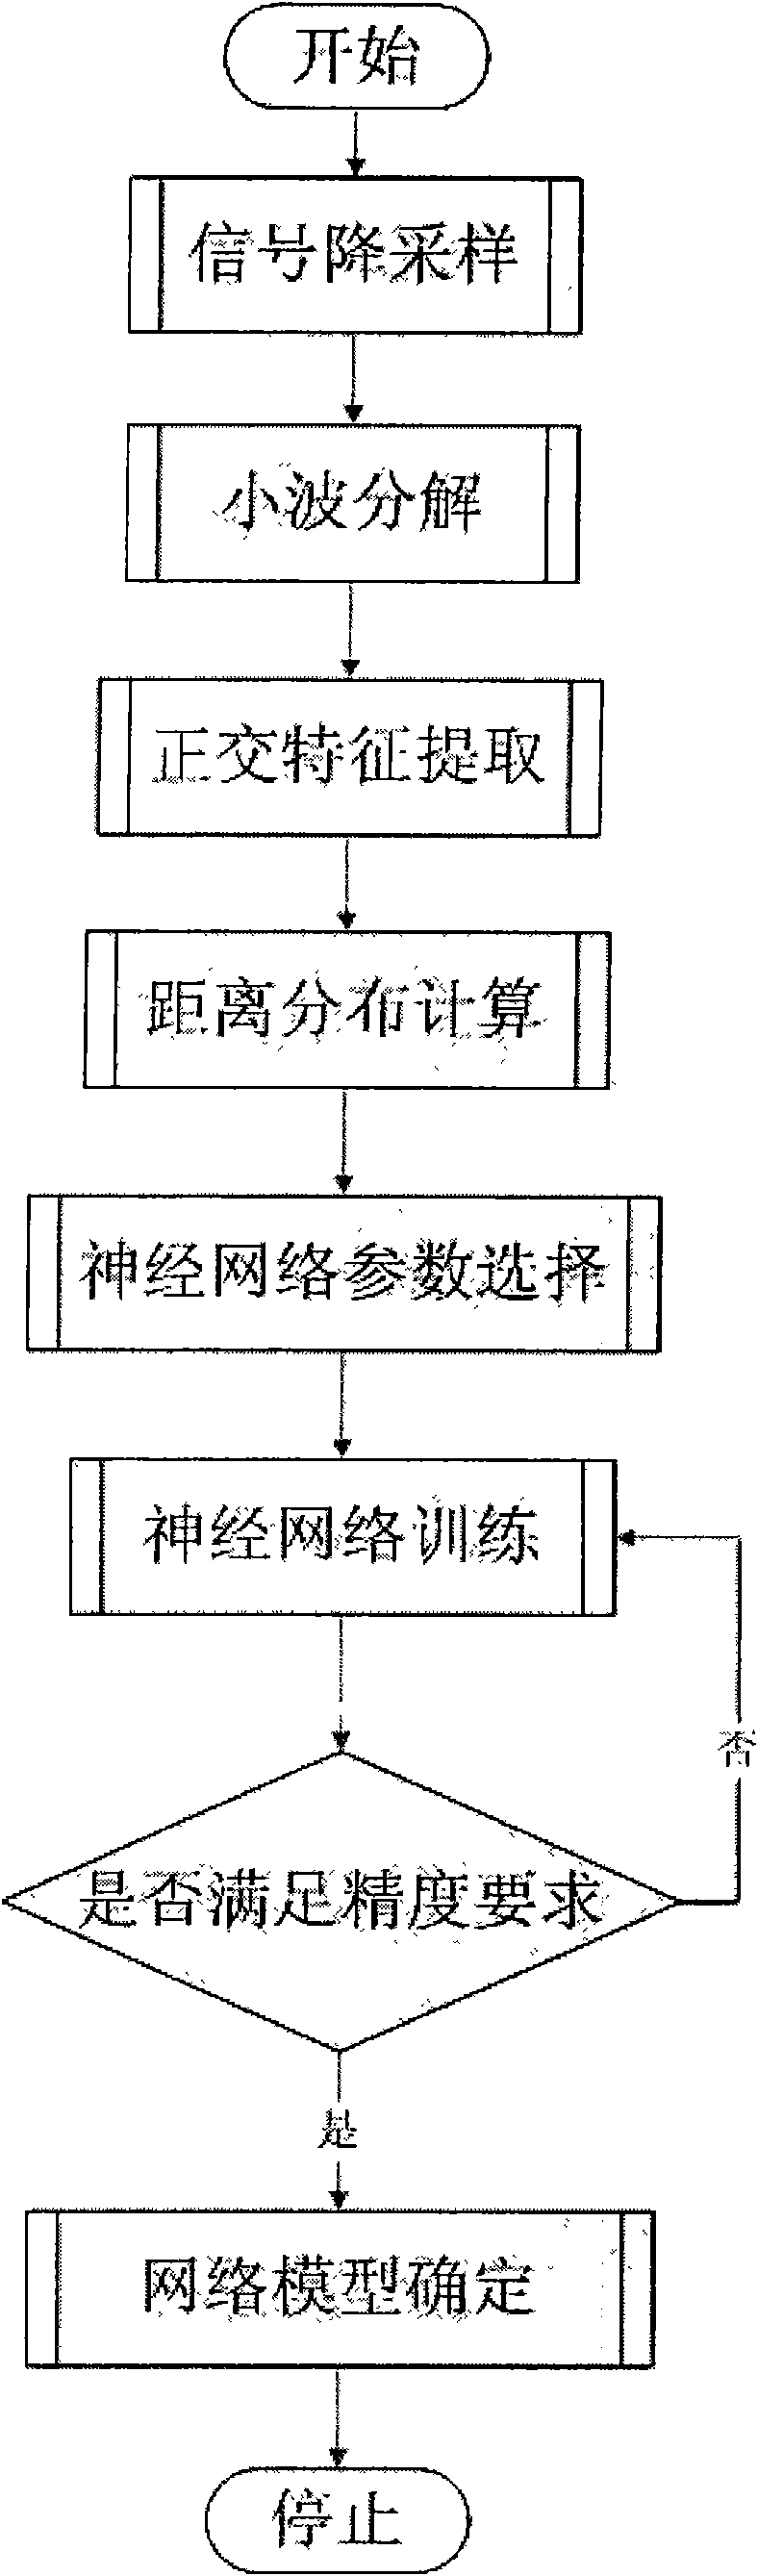 Event pre-warning and classifying method by external safety pre-warning and positioning system of photoelectric composite cables